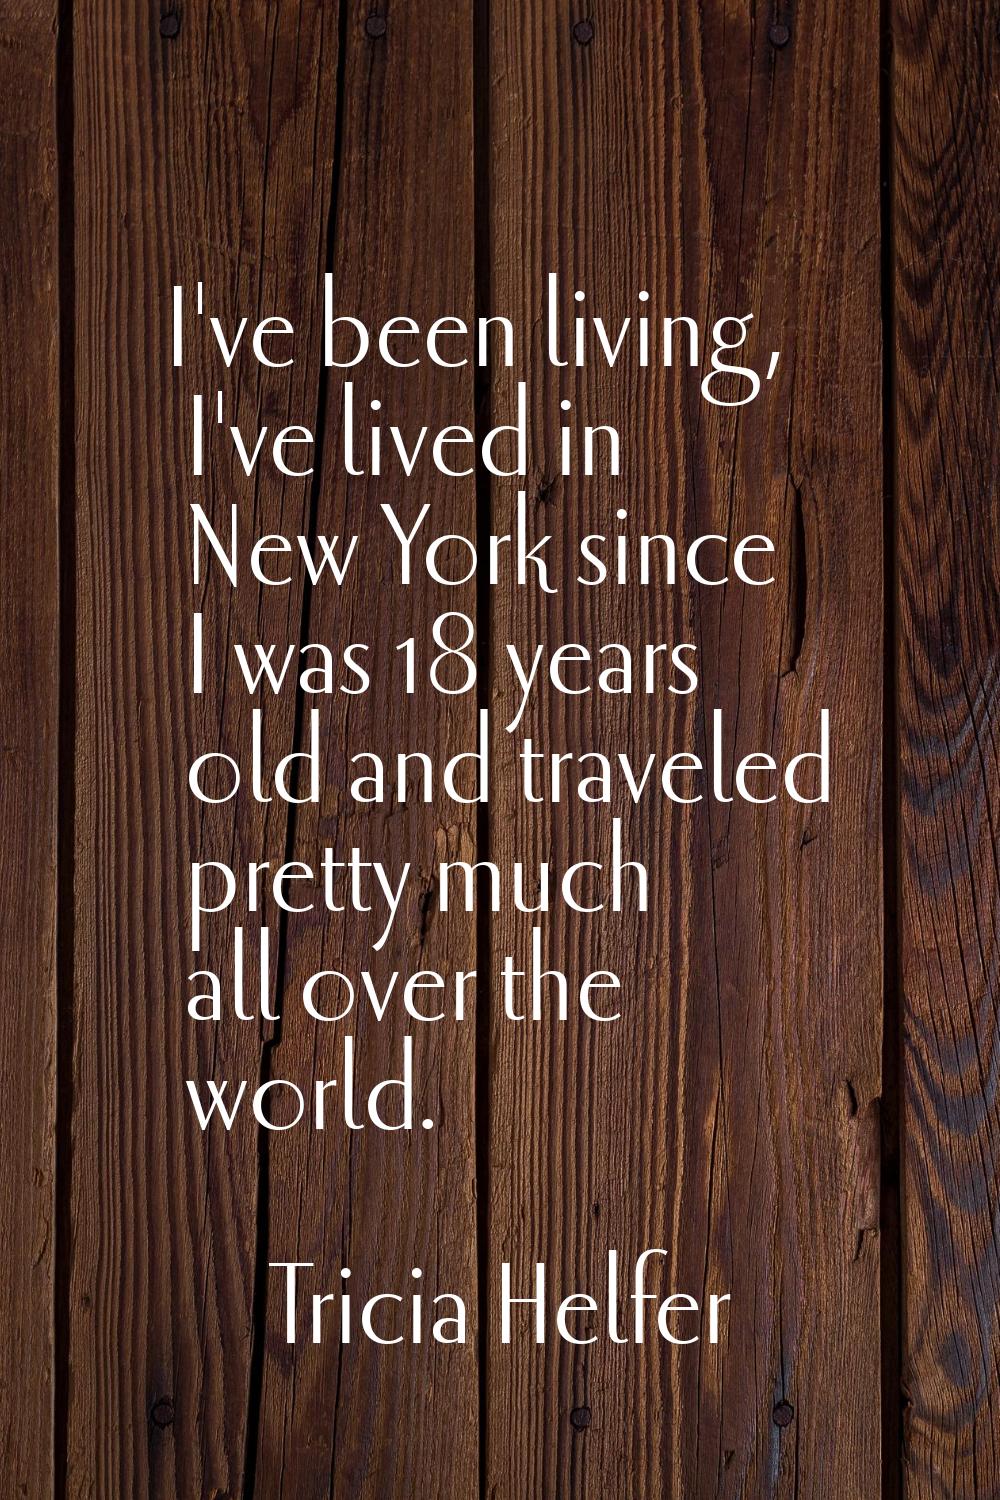 I've been living, I've lived in New York since I was 18 years old and traveled pretty much all over